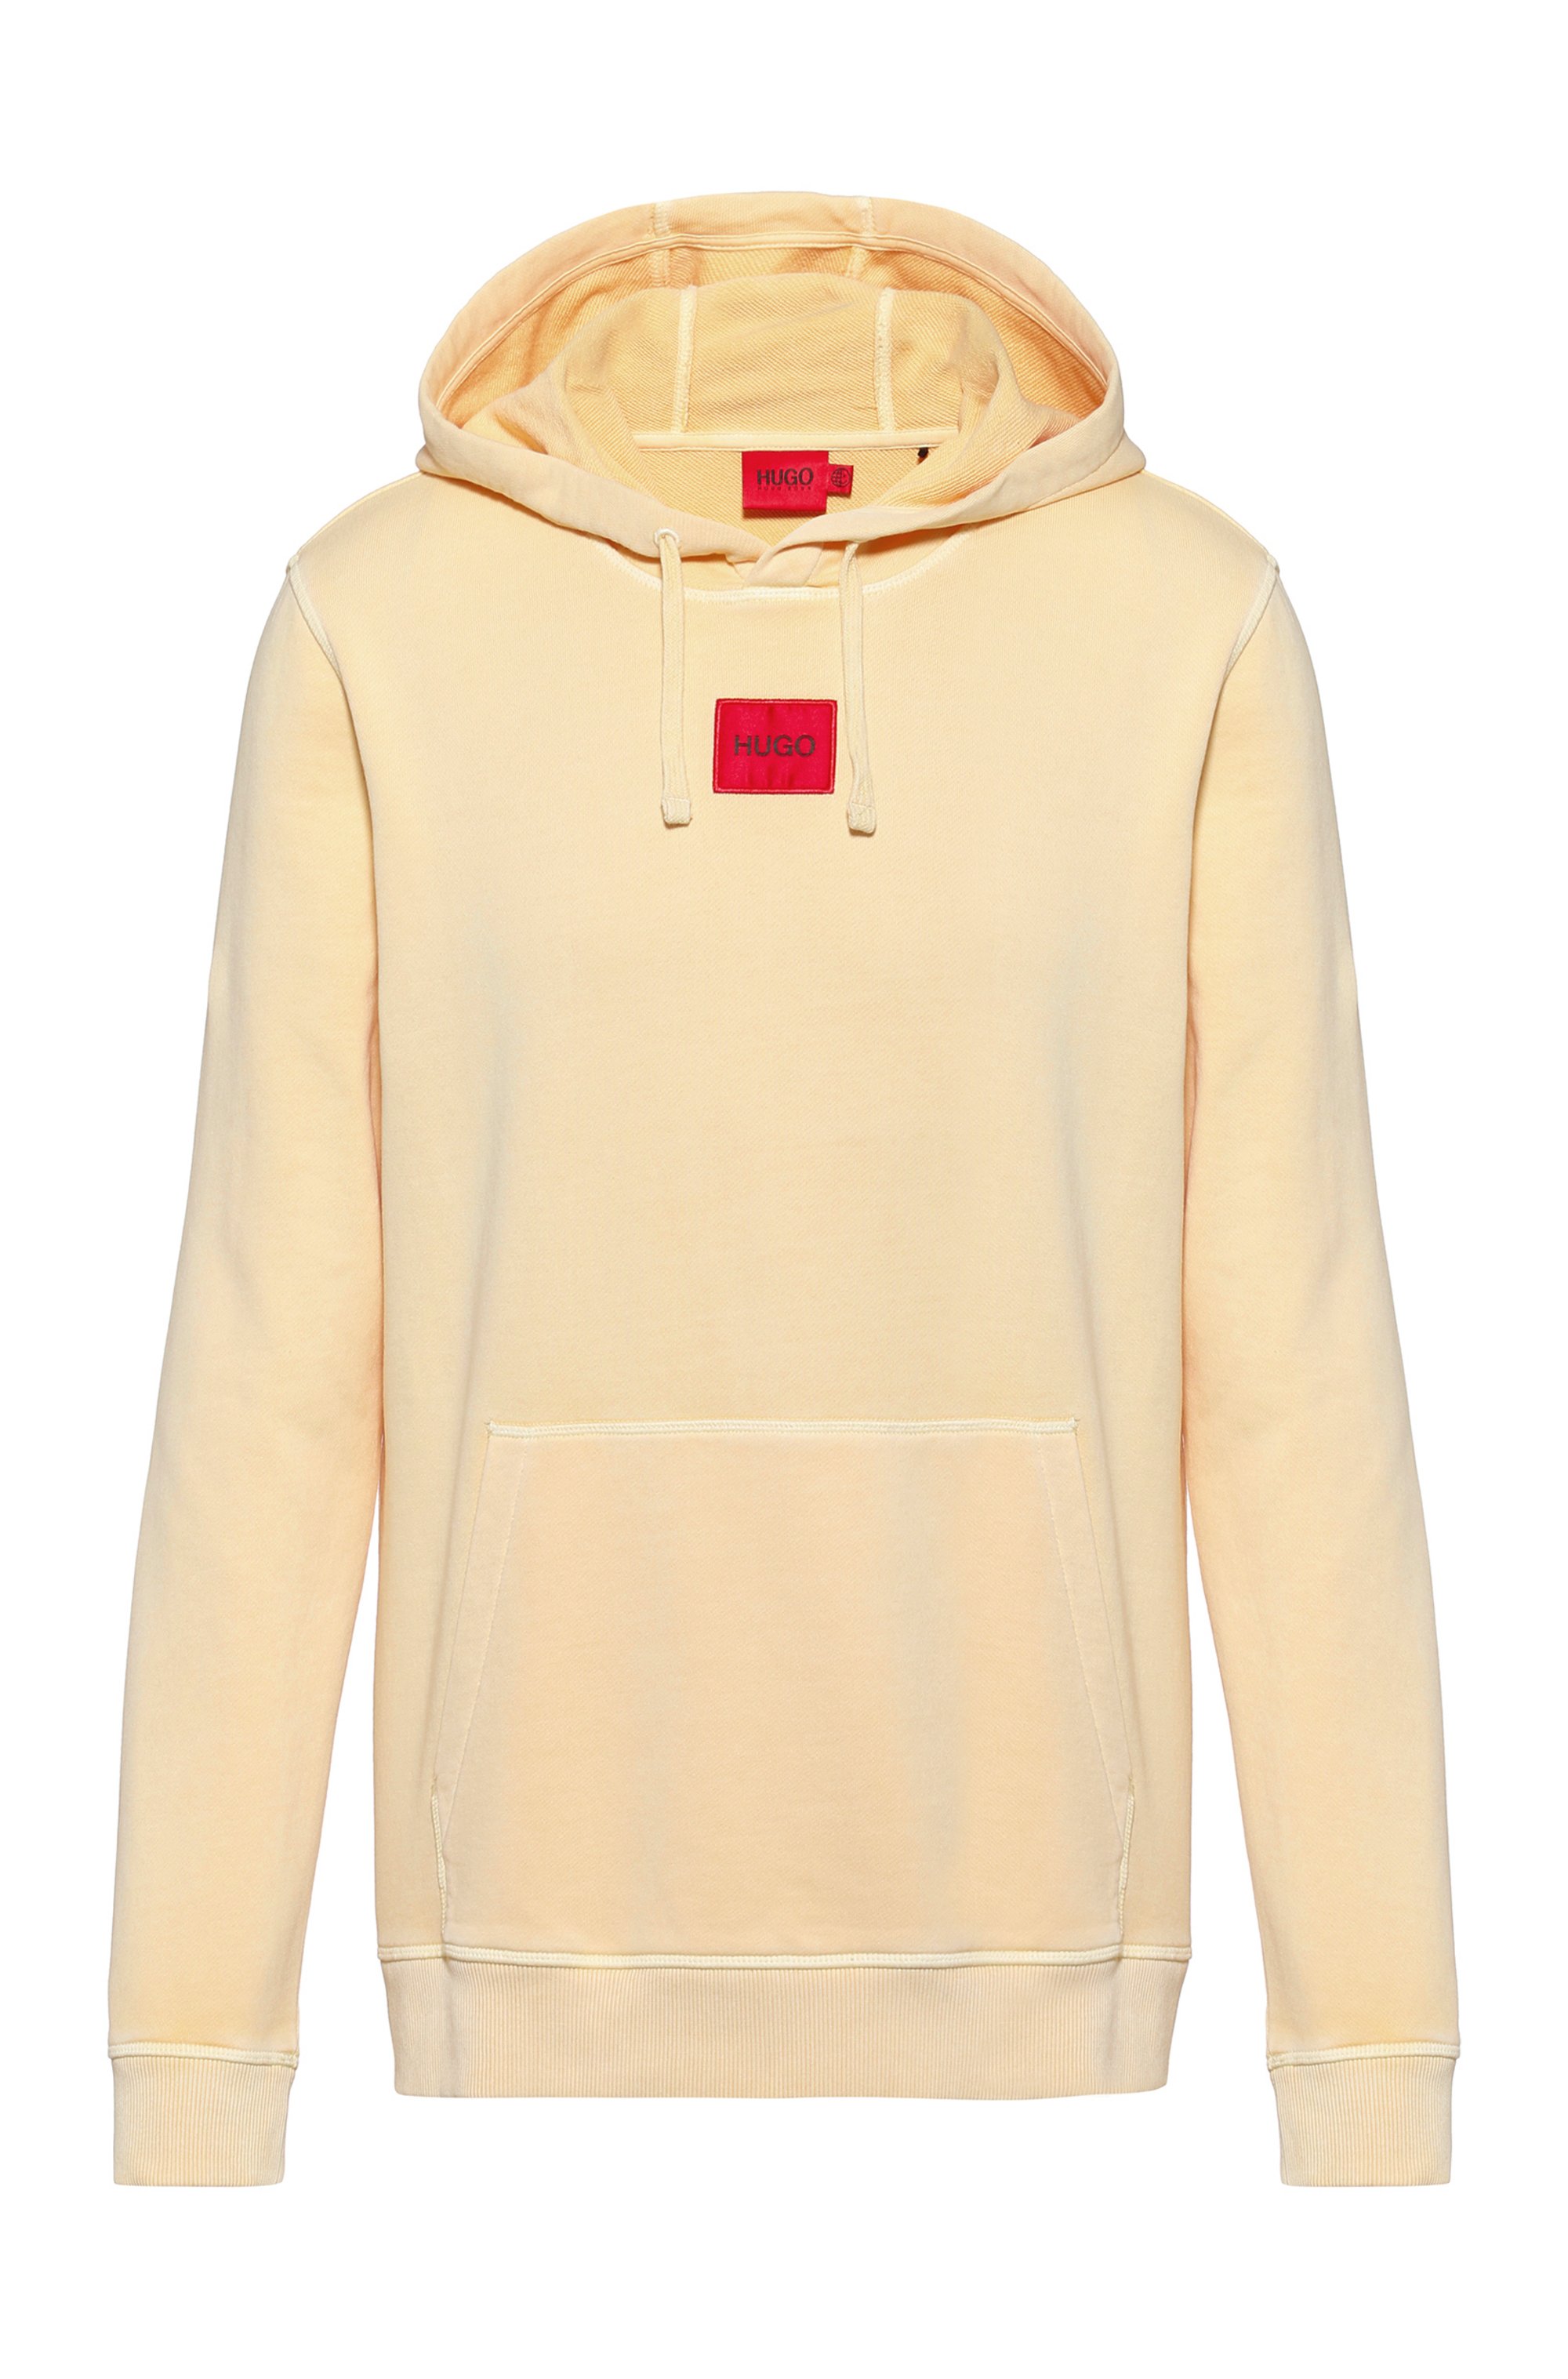 Hooded sweatshirt in cotton with red logo label, Light Yellow